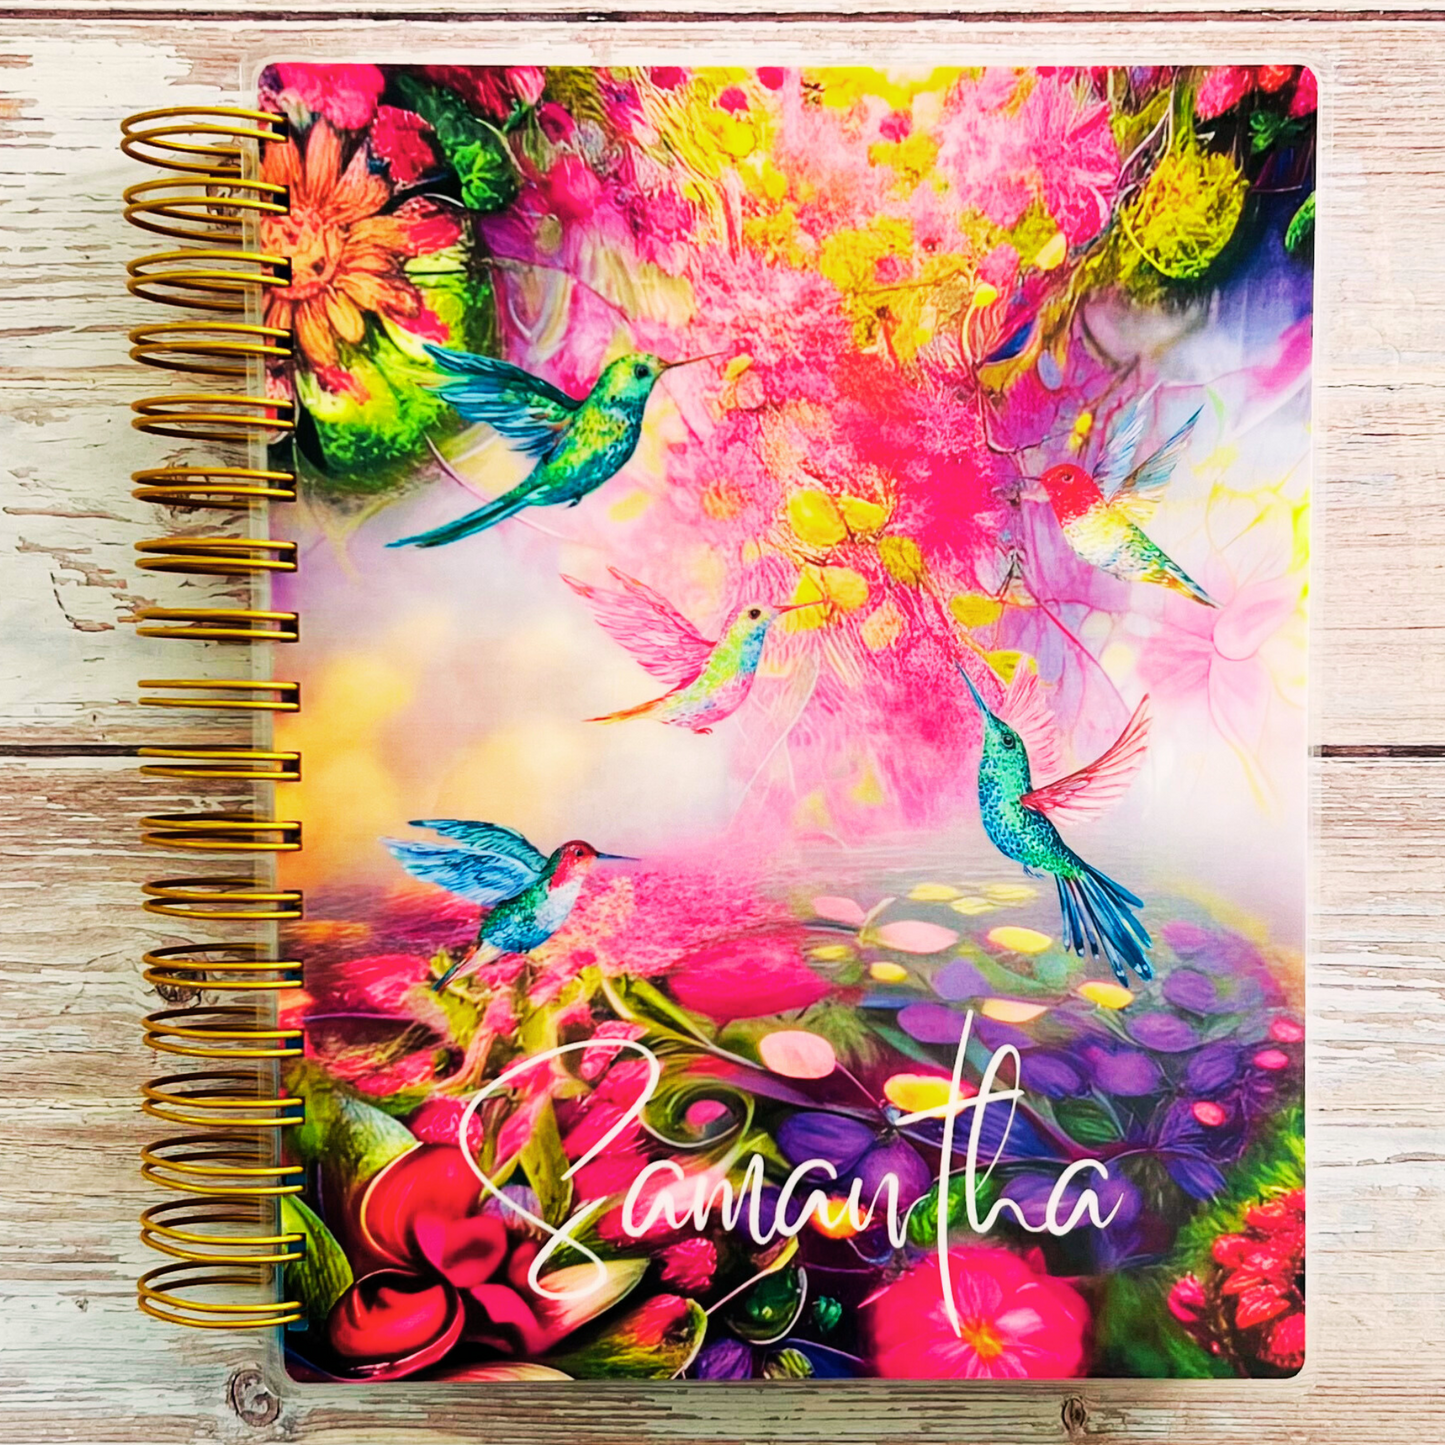 2023-2024 Personalized Monthly Planner - Ethereal Hummingbird Garden Monthly Planners Artful Planner Co. July-2023 20 Meal Planner Pages added to back +$3.00 